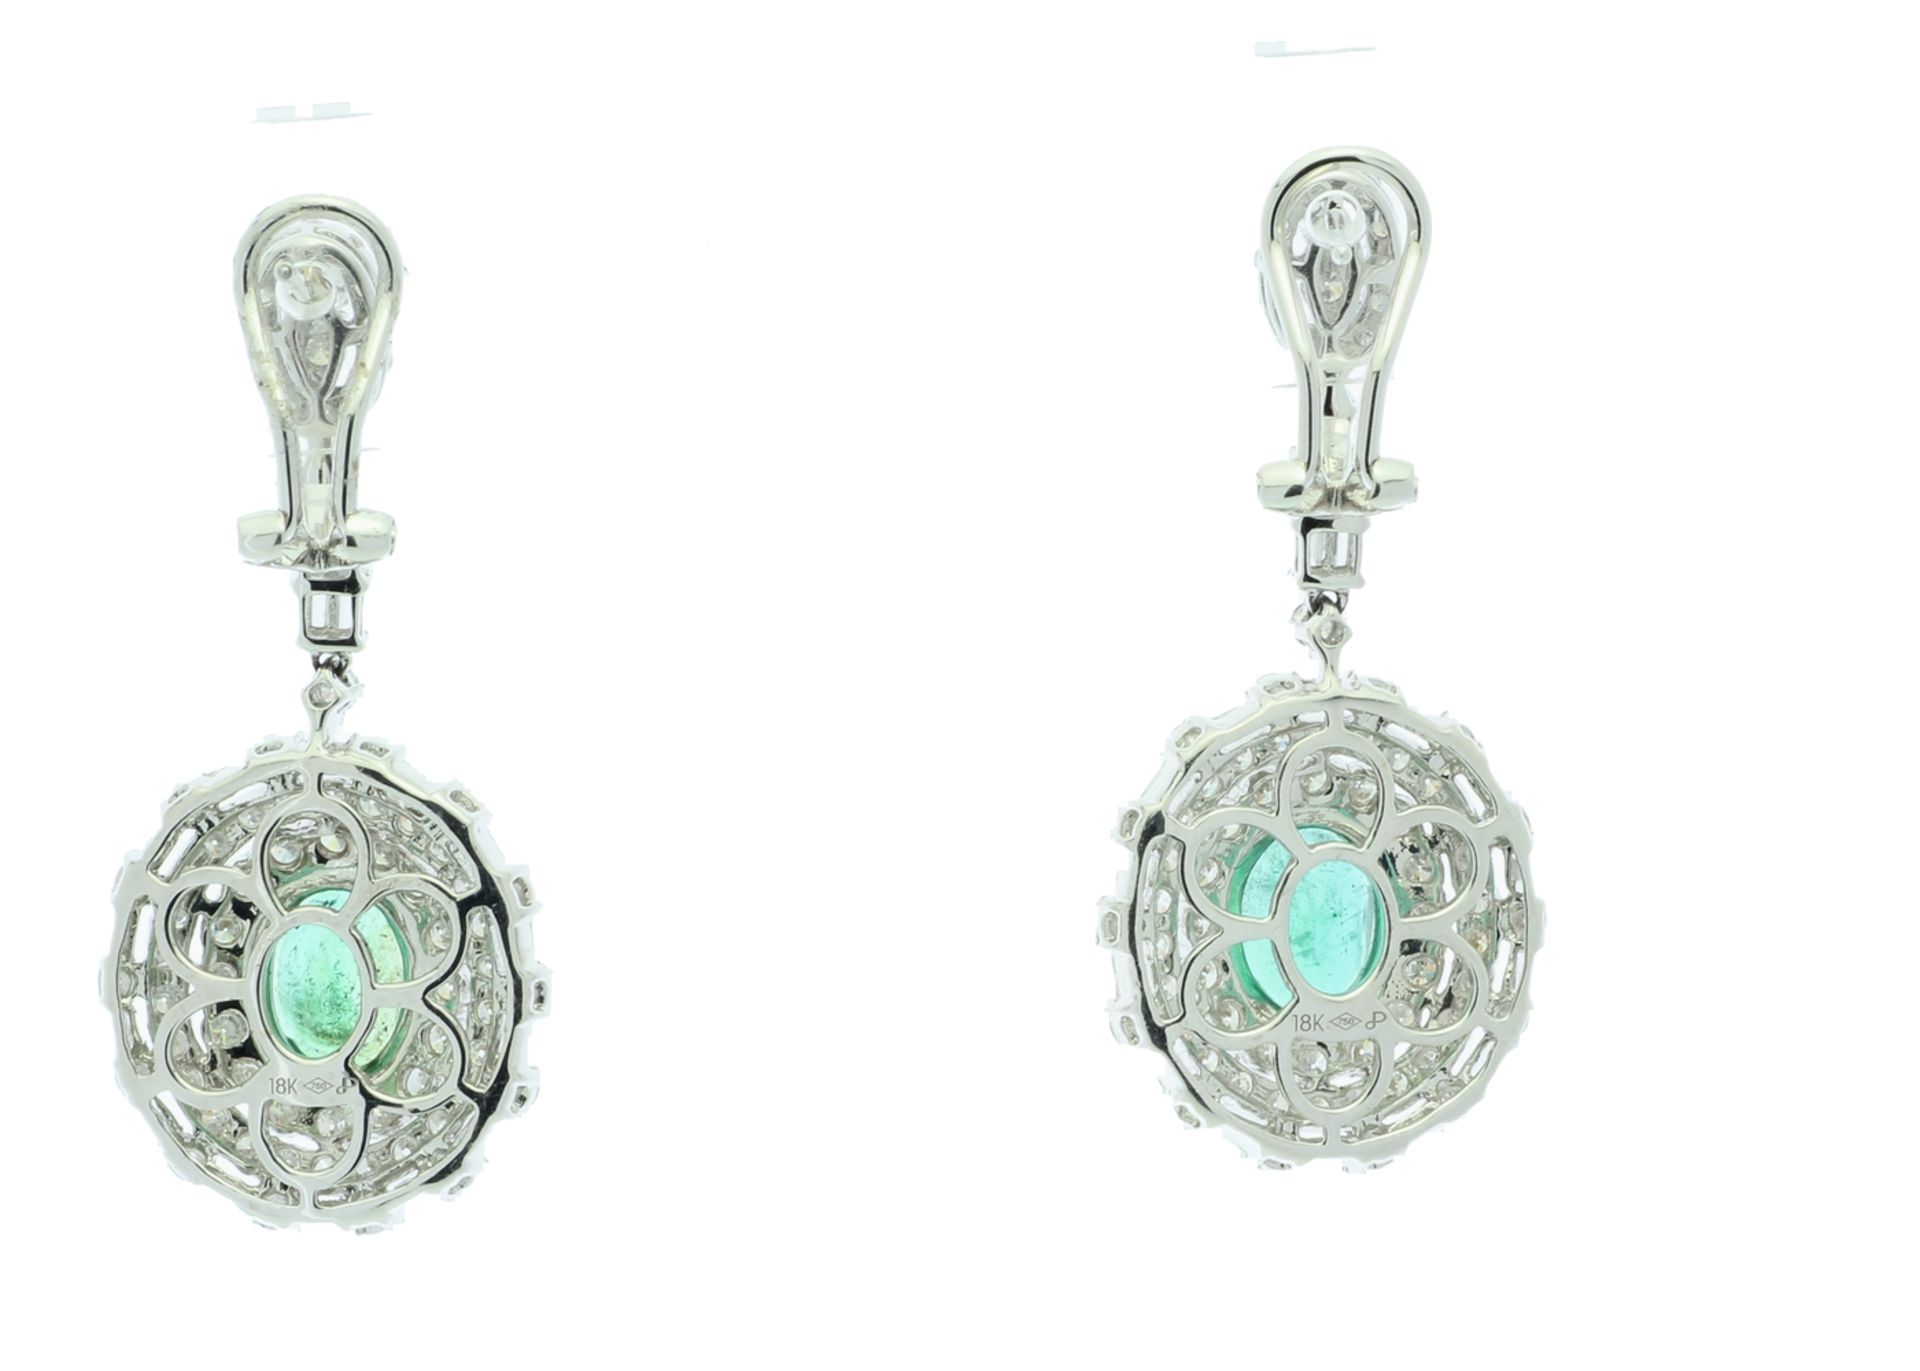 18ct White Gold Diamond And Emerald Drop Earrings (E2.61) 3.74 Carats - Valued by IDI £18,000.00 - - Image 2 of 5